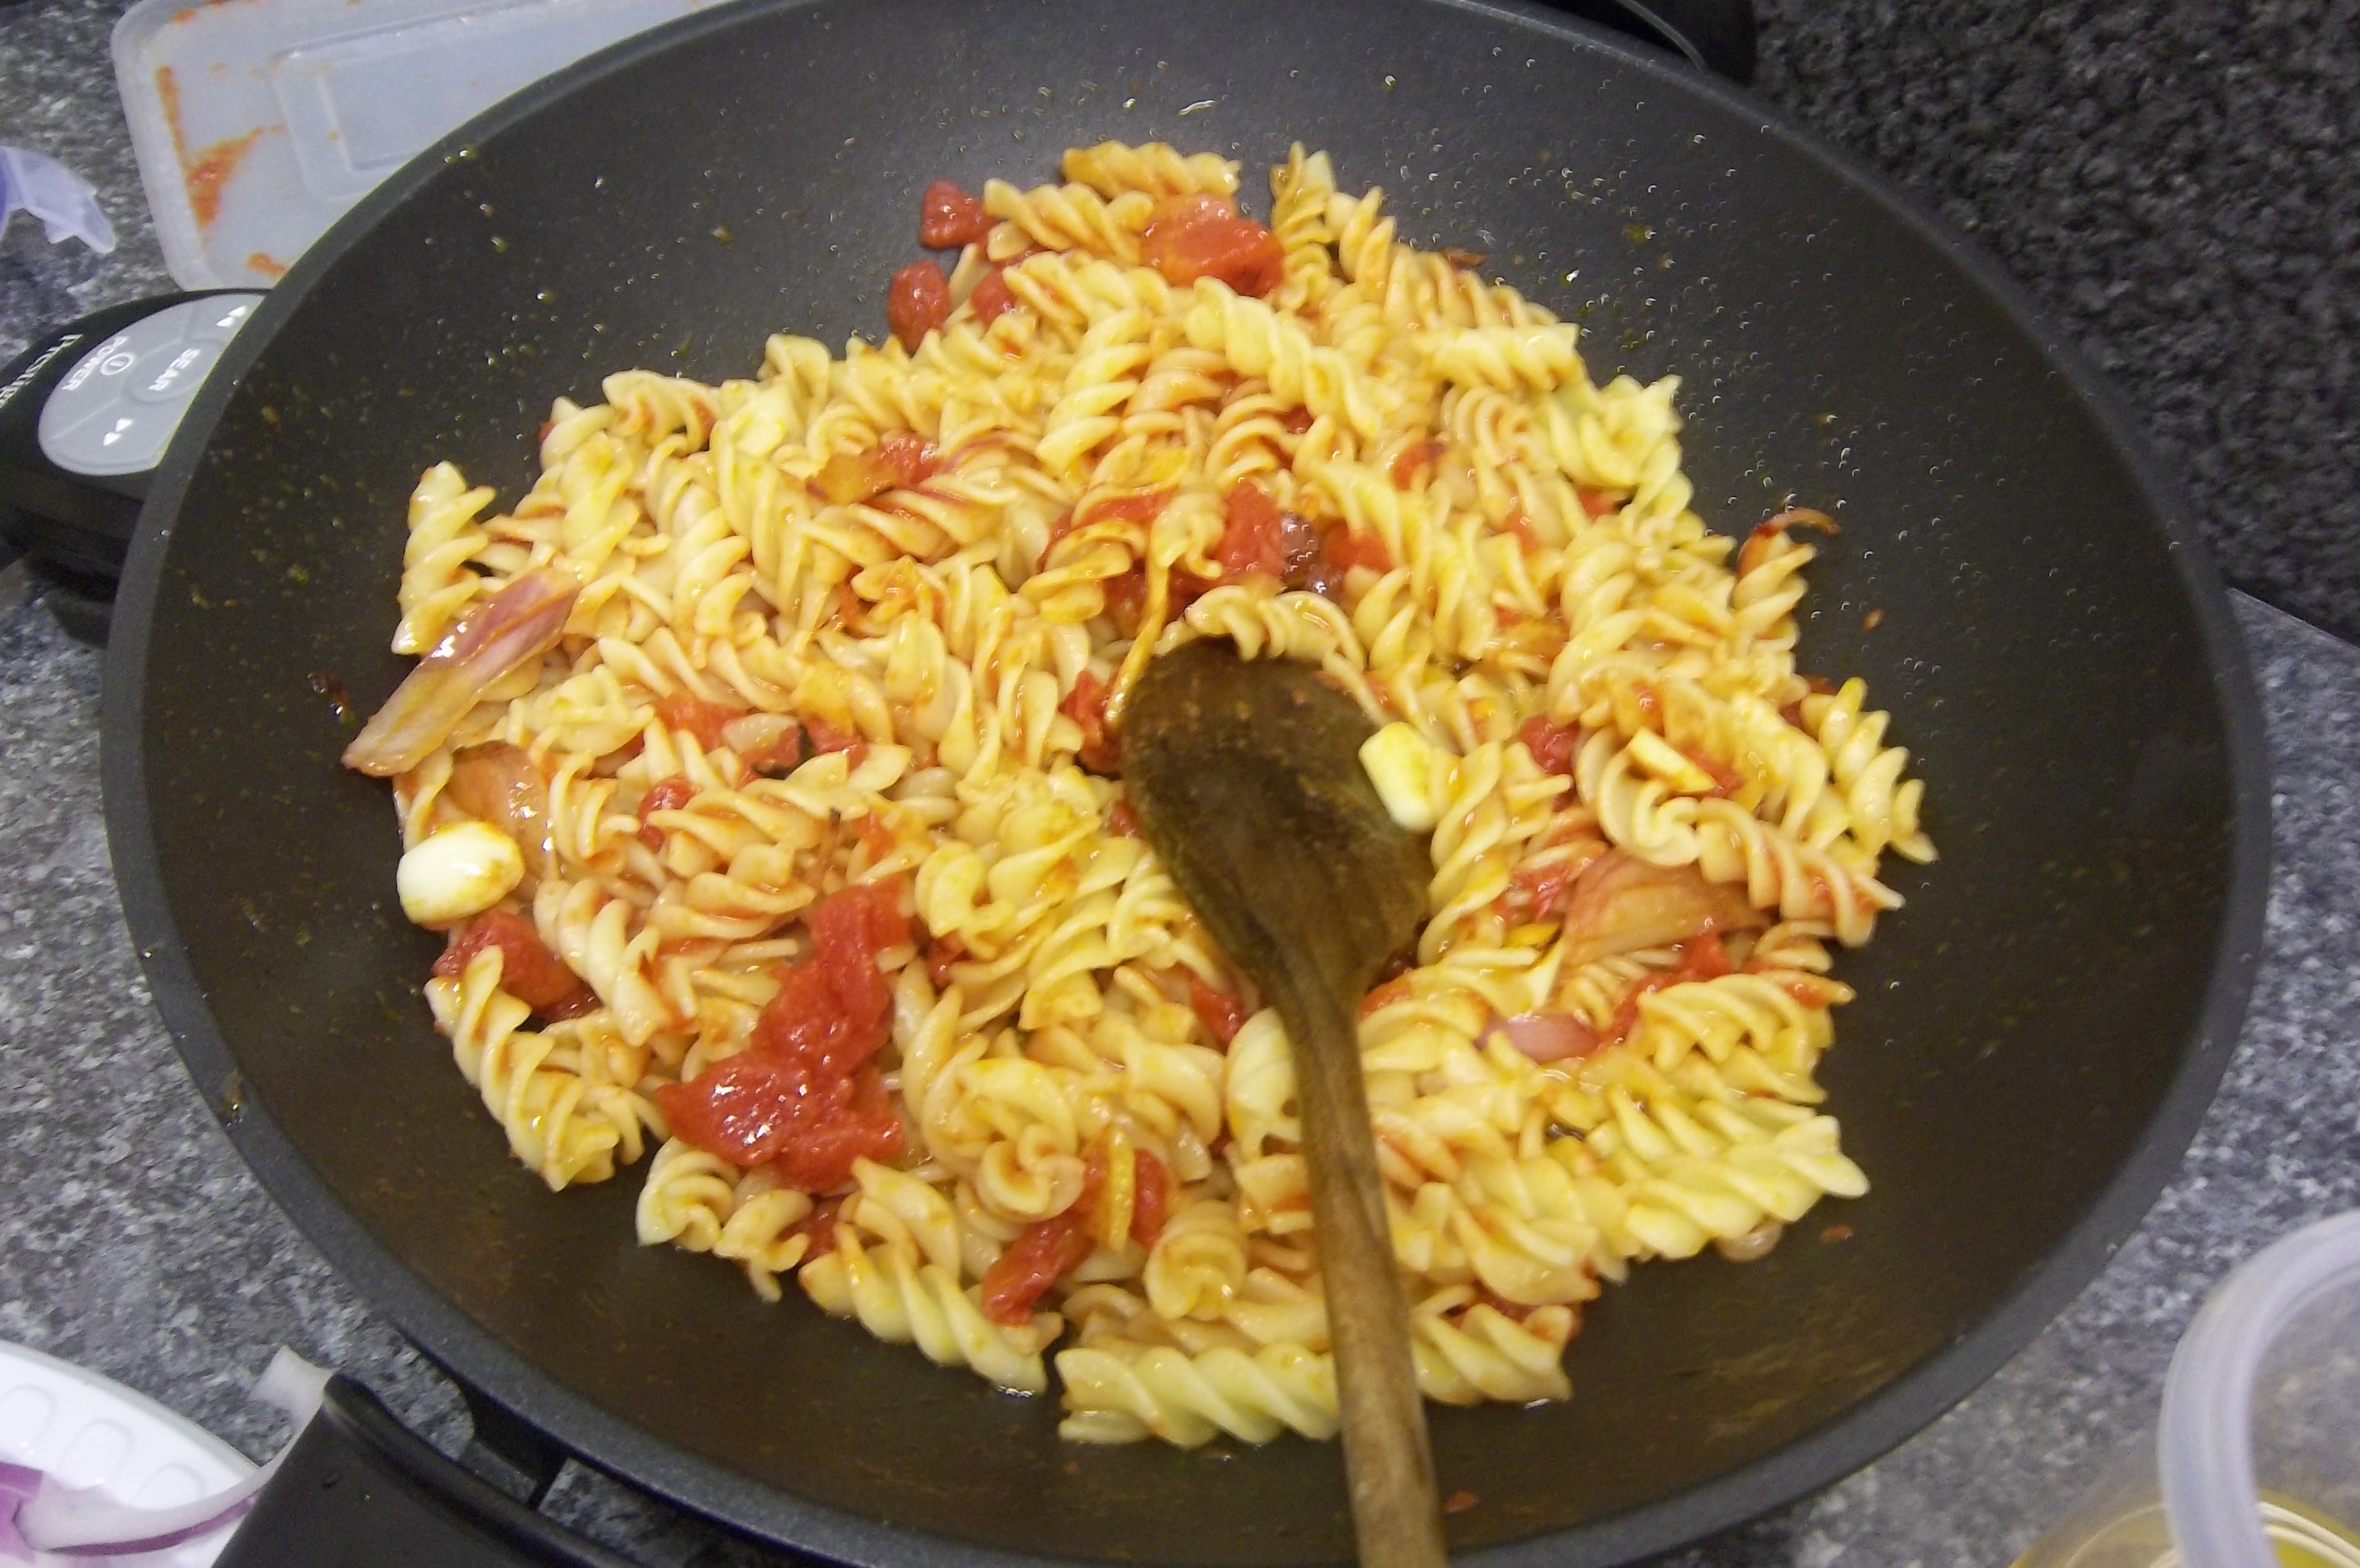 Pasta in tomato sauce is quick, cheap and healthy. Photo: Khaleel Ladhani